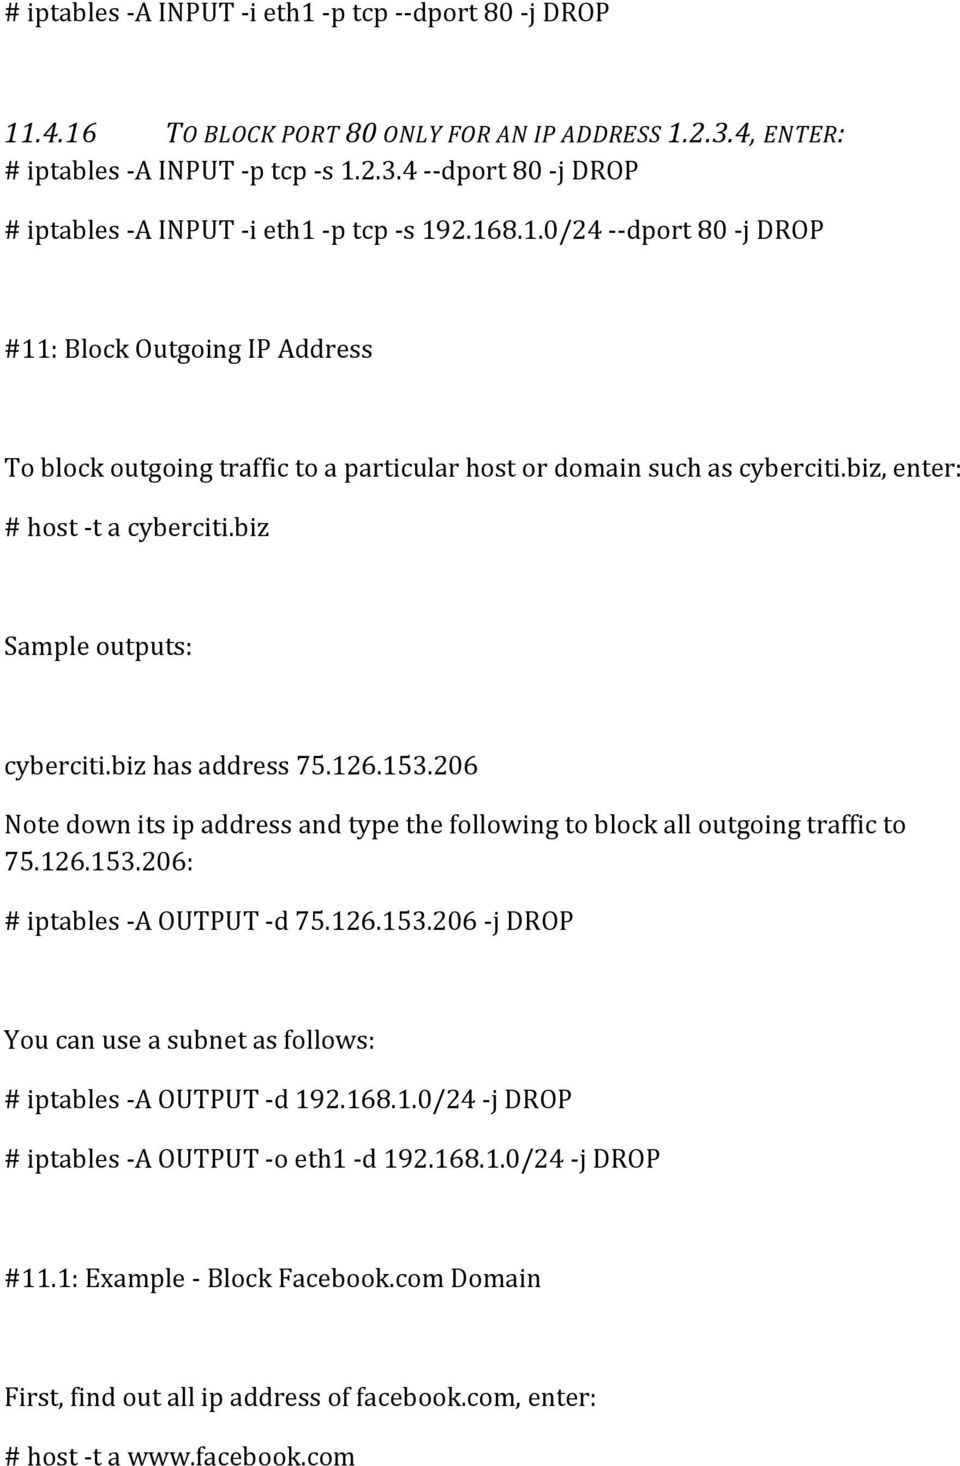 biz has address 75.126.153.206 Note down its ip address and type the following to block all outgoing traffic to 75.126.153.206: # iptables -A OUTPUT -d 75.126.153.206 -j DROP You can use a subnet as follows: # iptables -A OUTPUT -d 192.